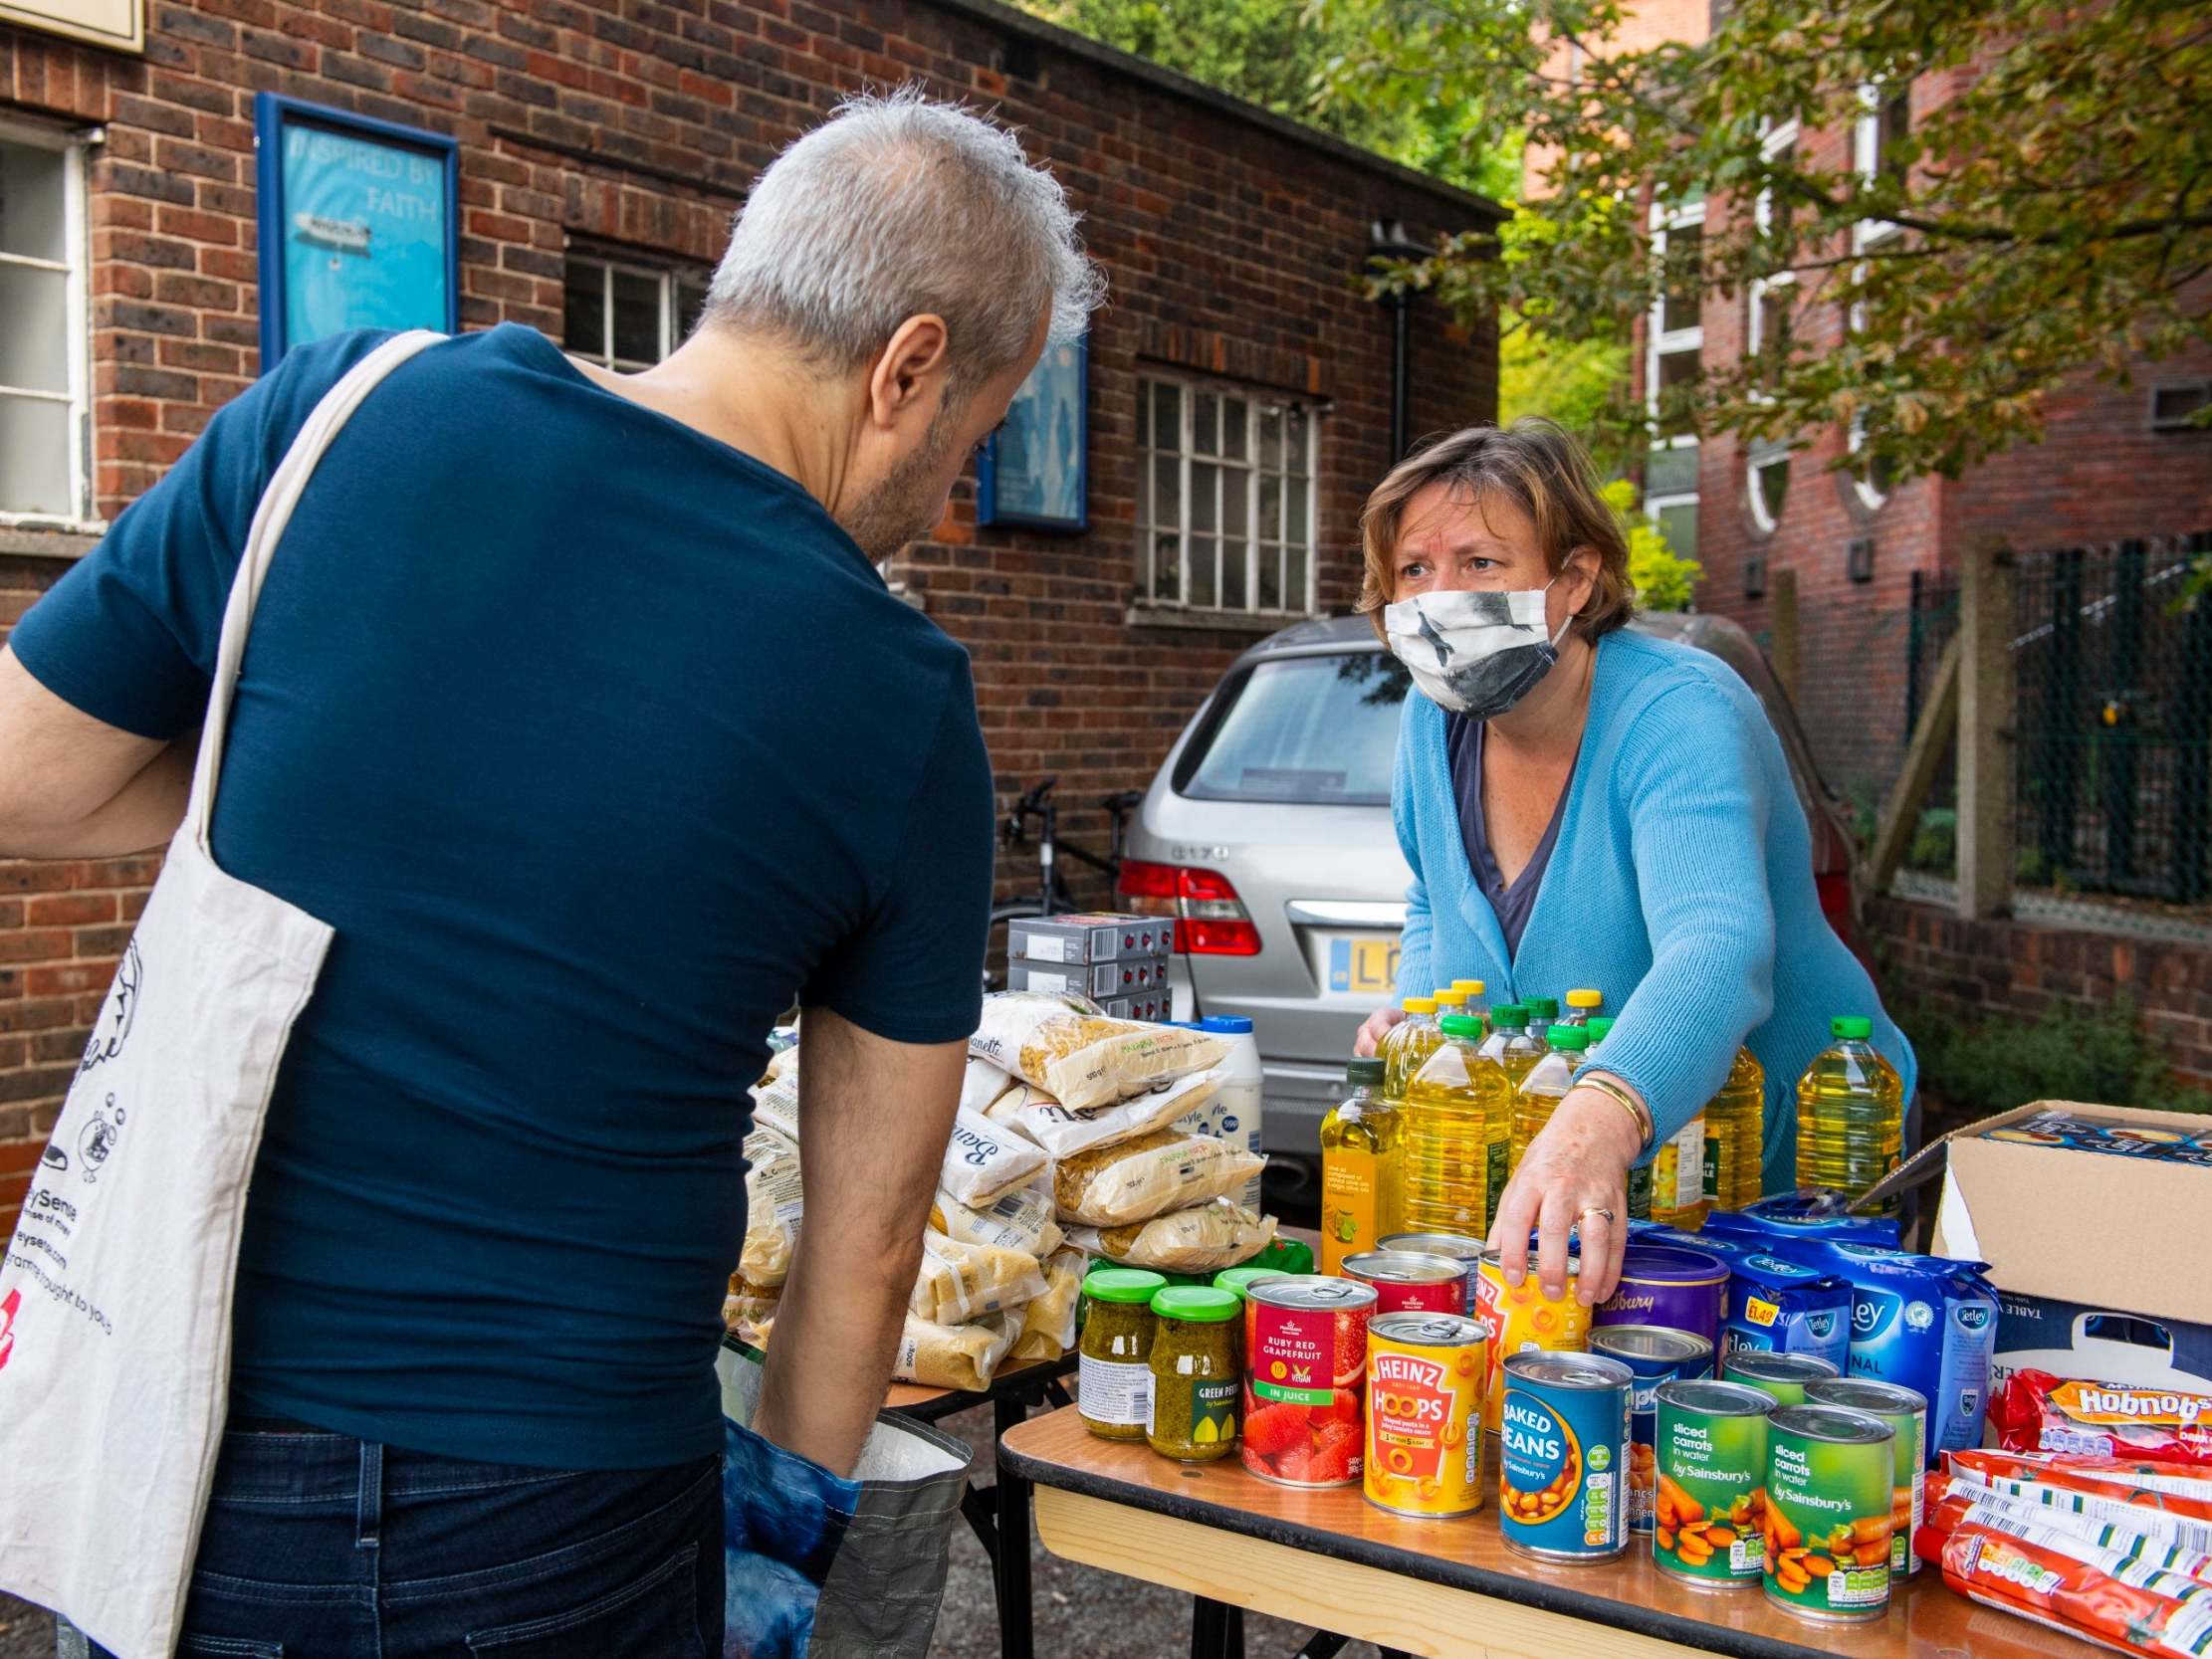 West London Welcome in Hammersmith, where a food bank for refugees operates